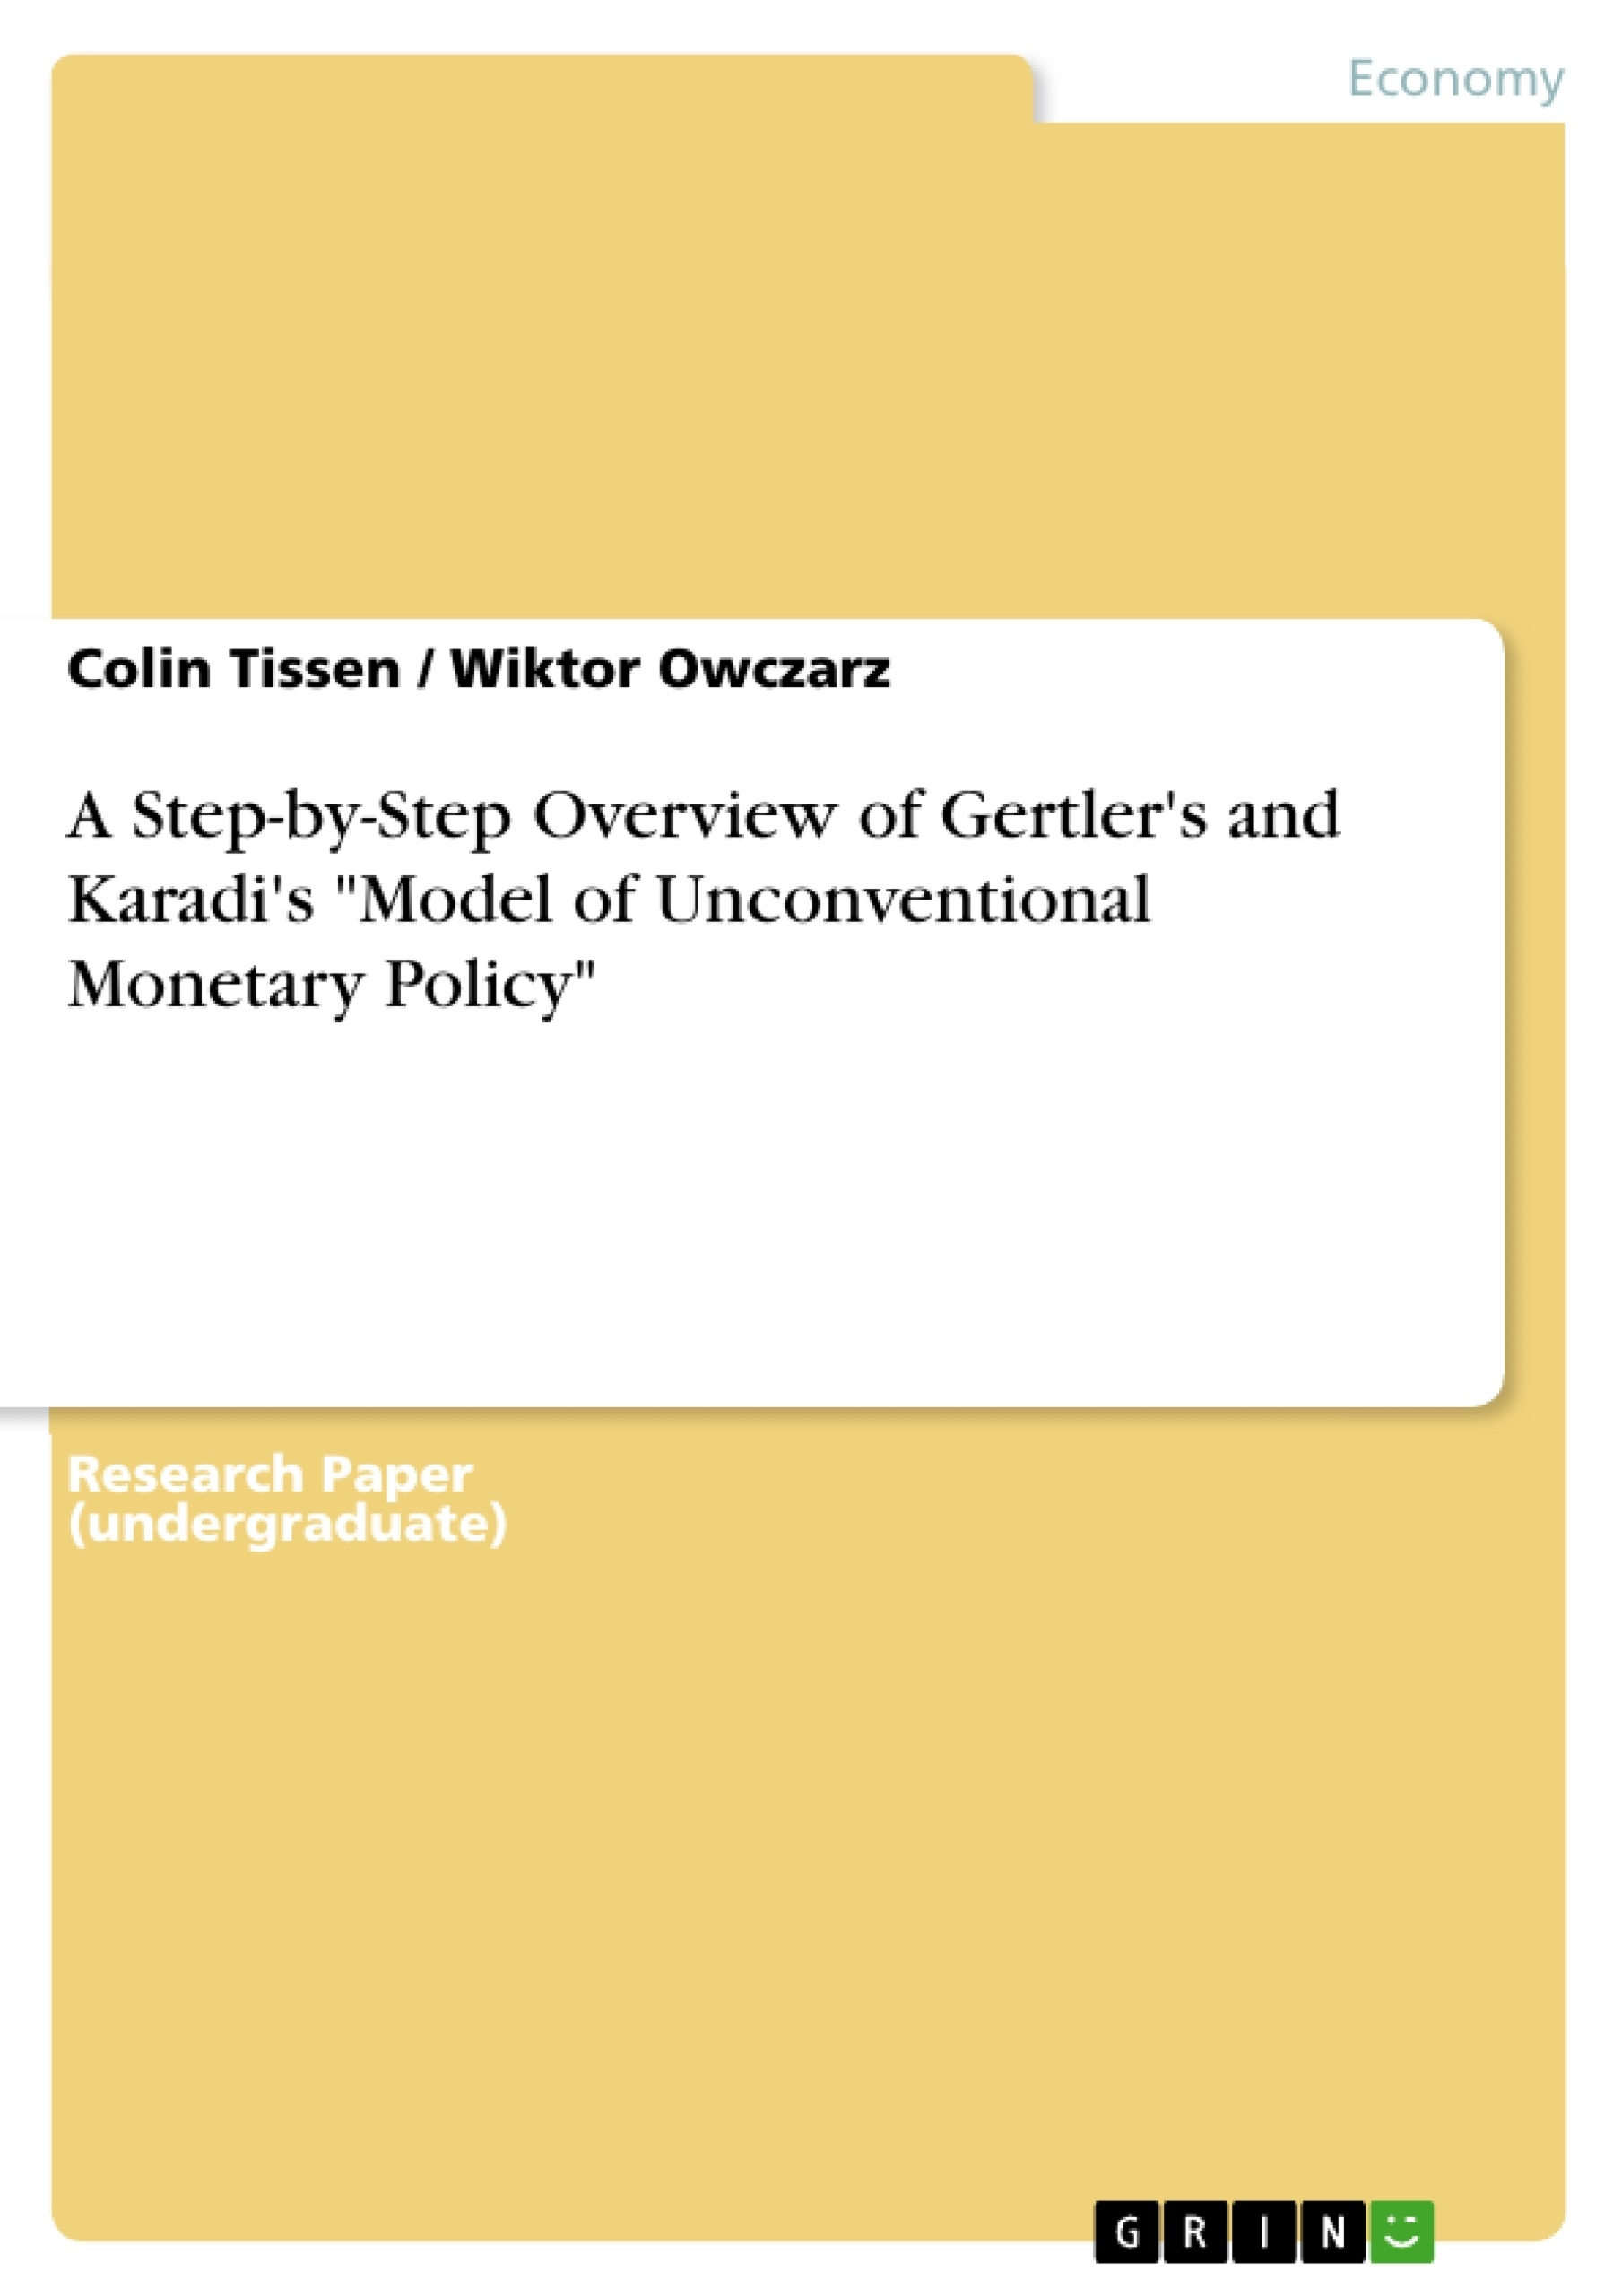 Title: A Step-by-Step Overview of Gertler's and Karadi's "Model of Unconventional Monetary Policy"